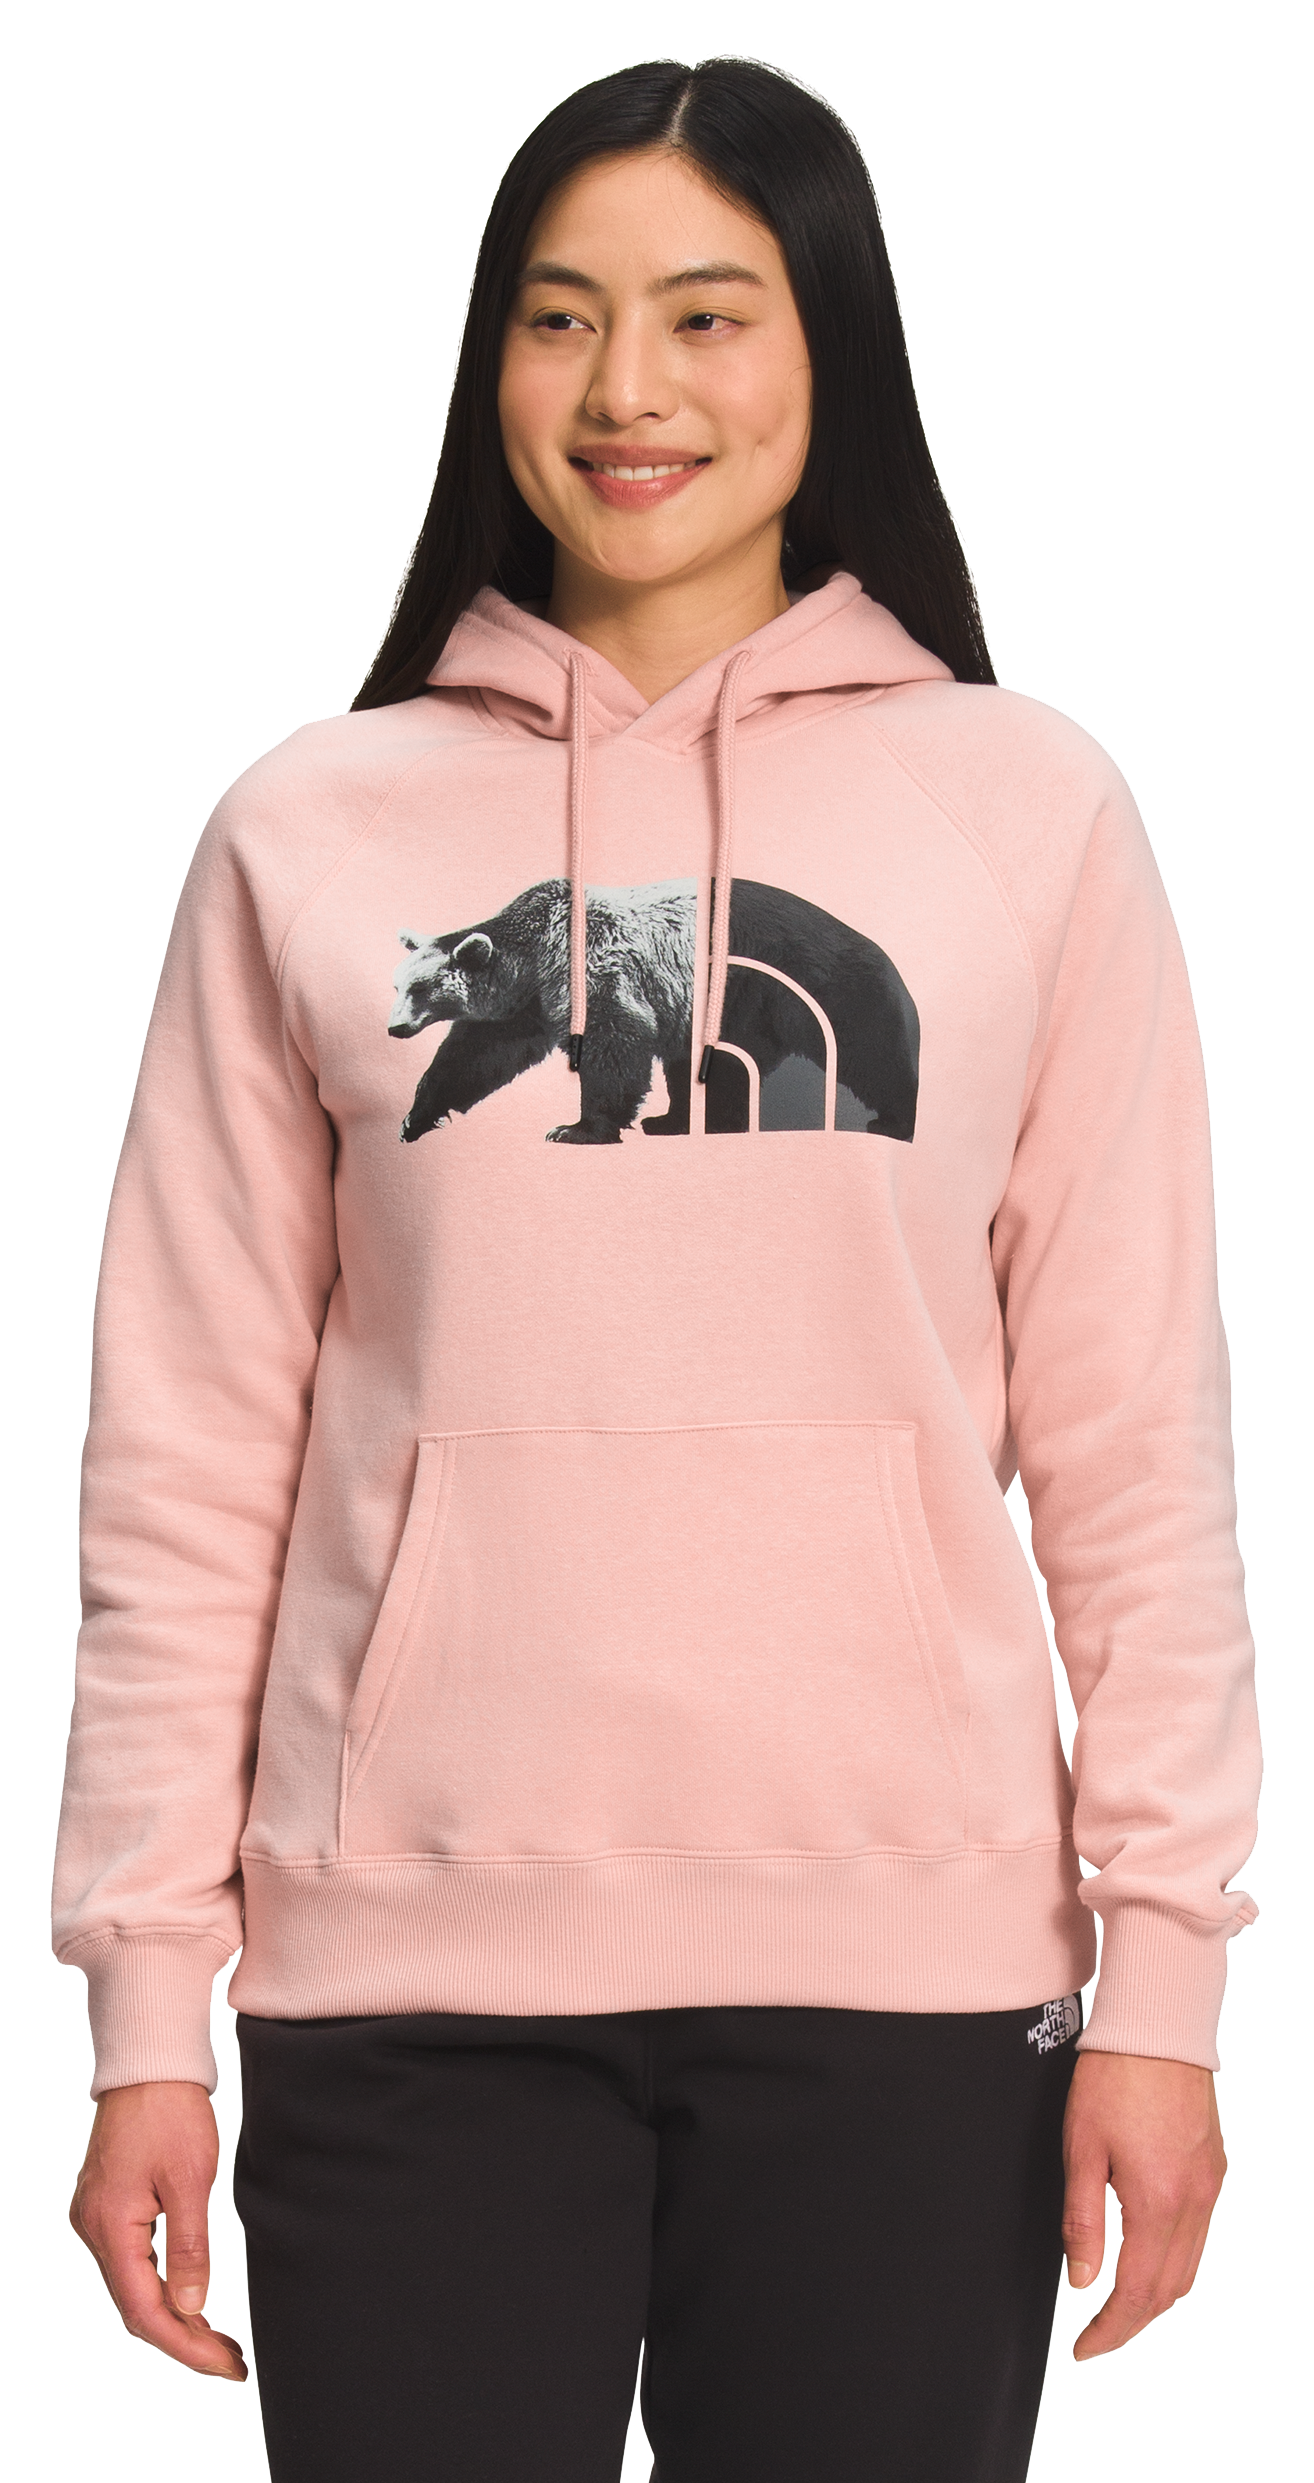 The North Face TNF Bear Long-Sleeve Hoodie for Ladies - Evening Sand Pink/TNF Black - XL